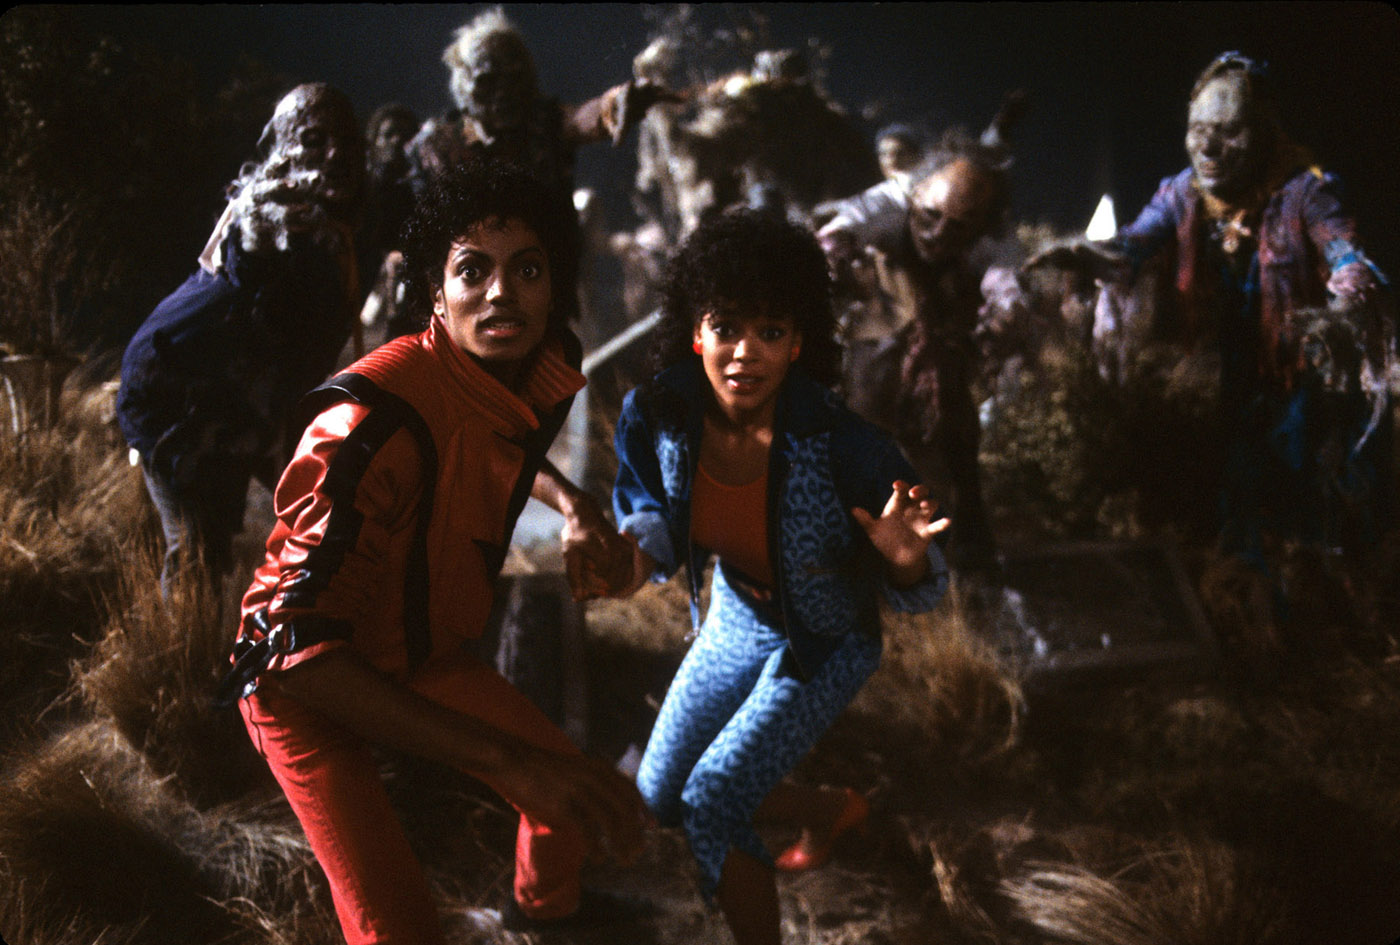 It's Time to Watch Michael Jackson's "Thriller" Again... - Bloody Disgusting